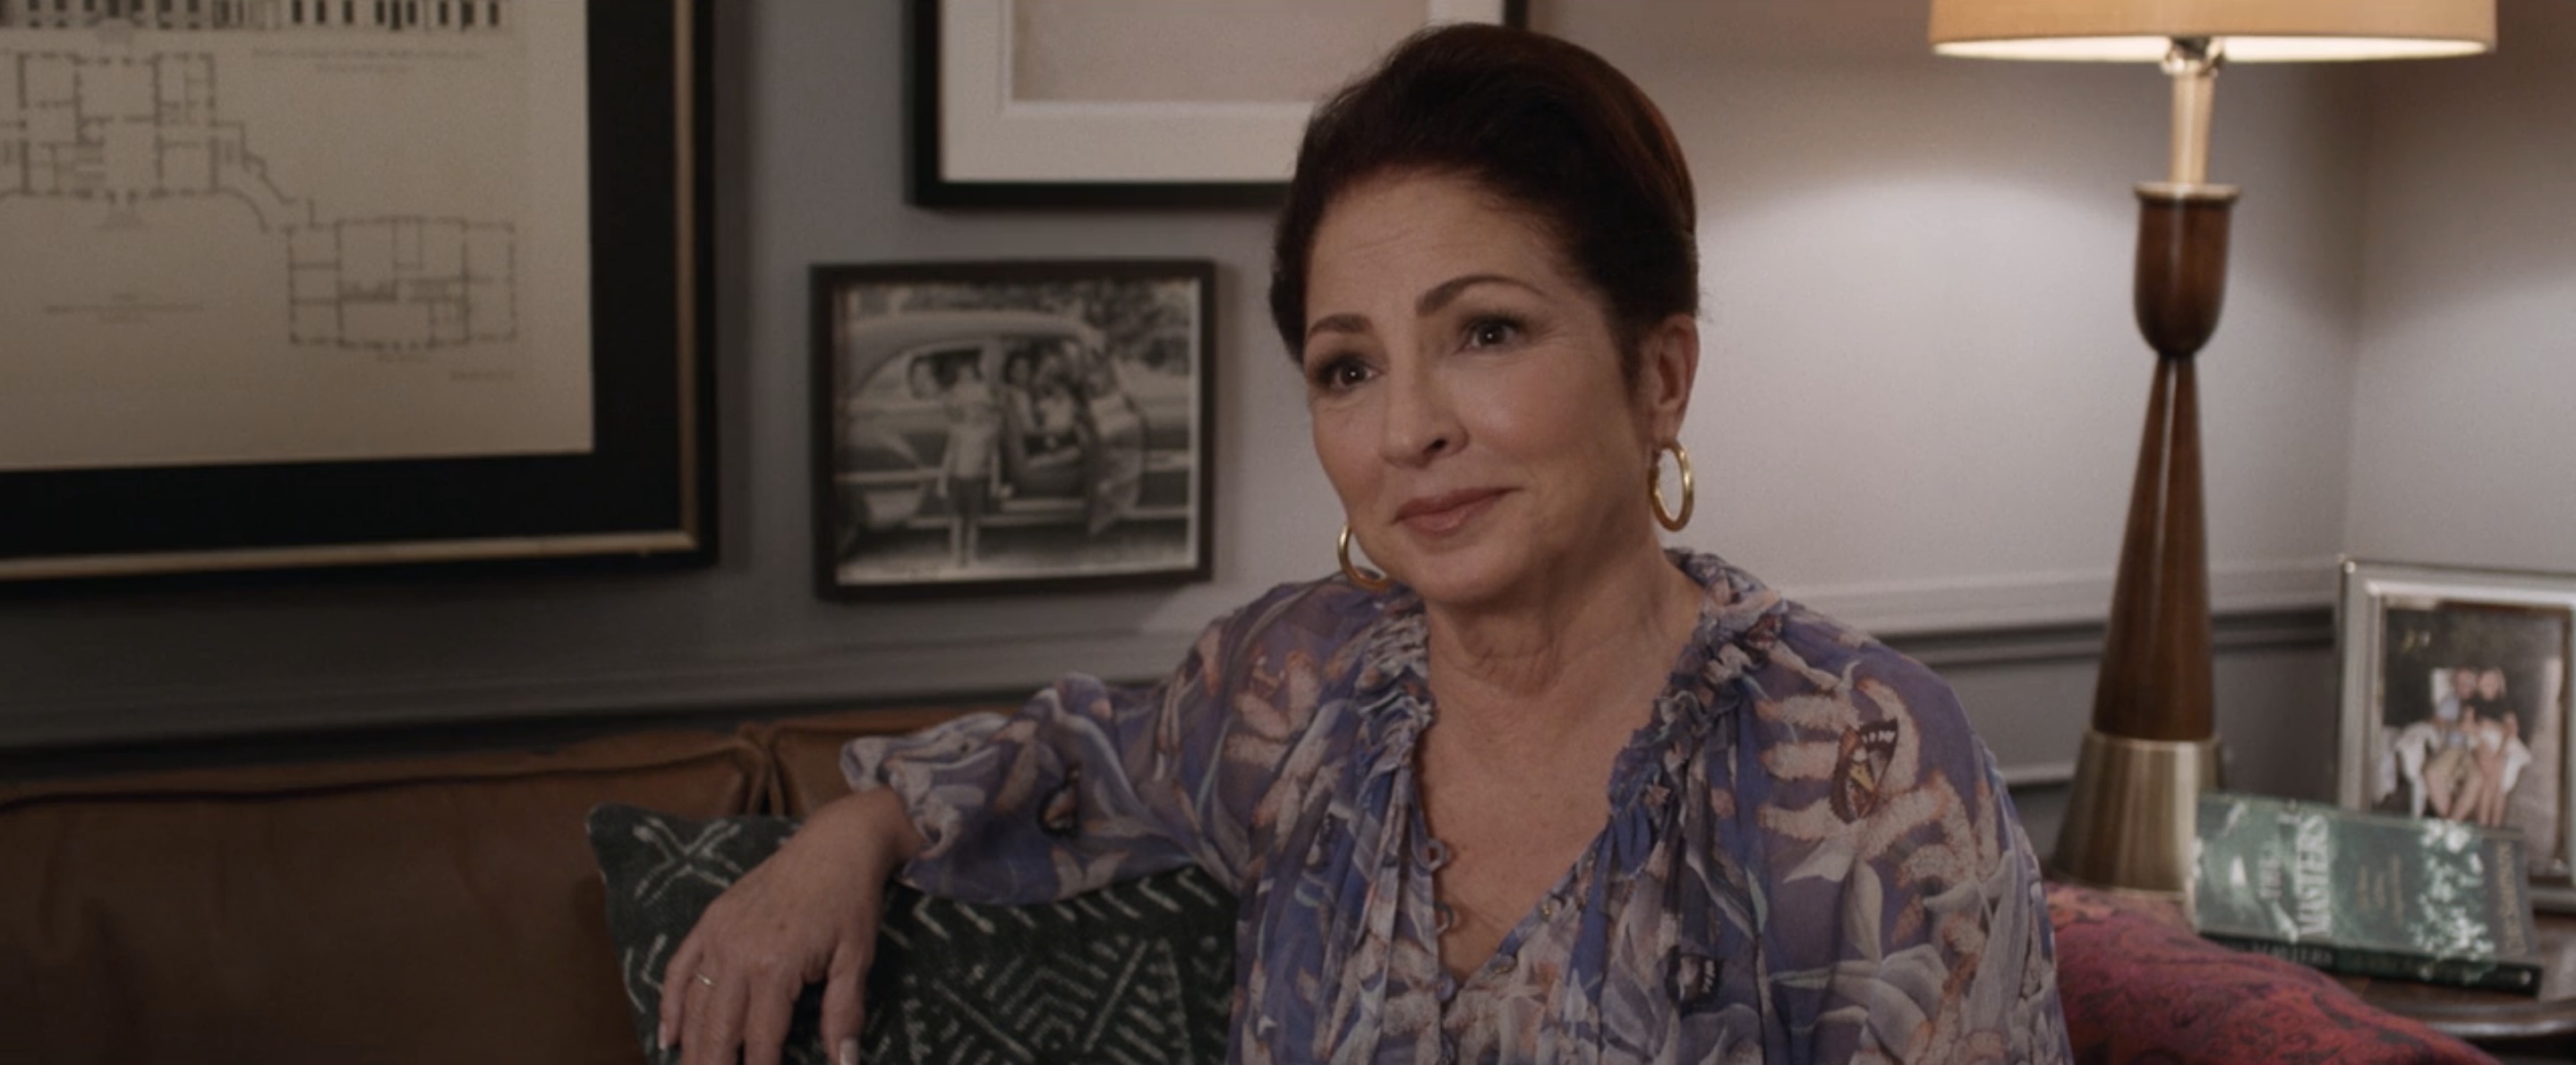 Father of the Bride Cast on HBO Max - Gloria Estefan as Ingrid